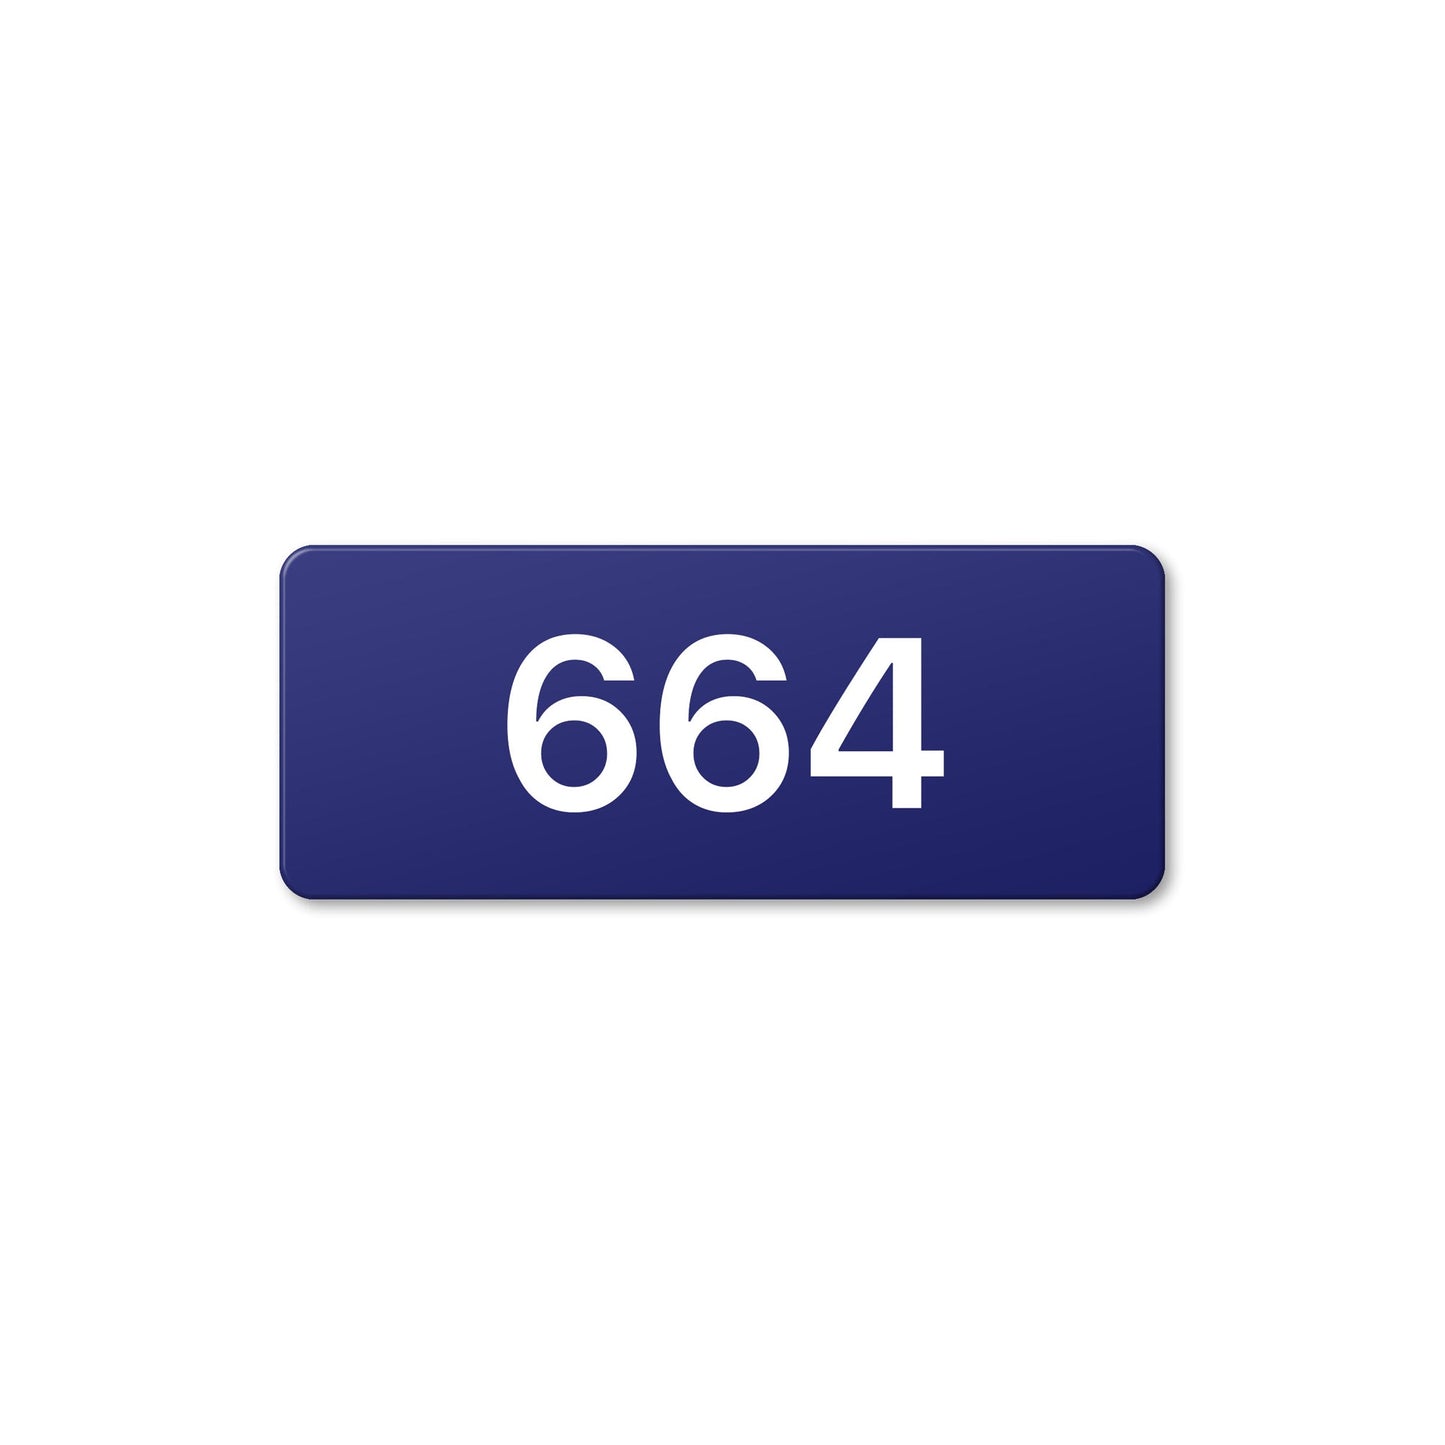 Numeral 664